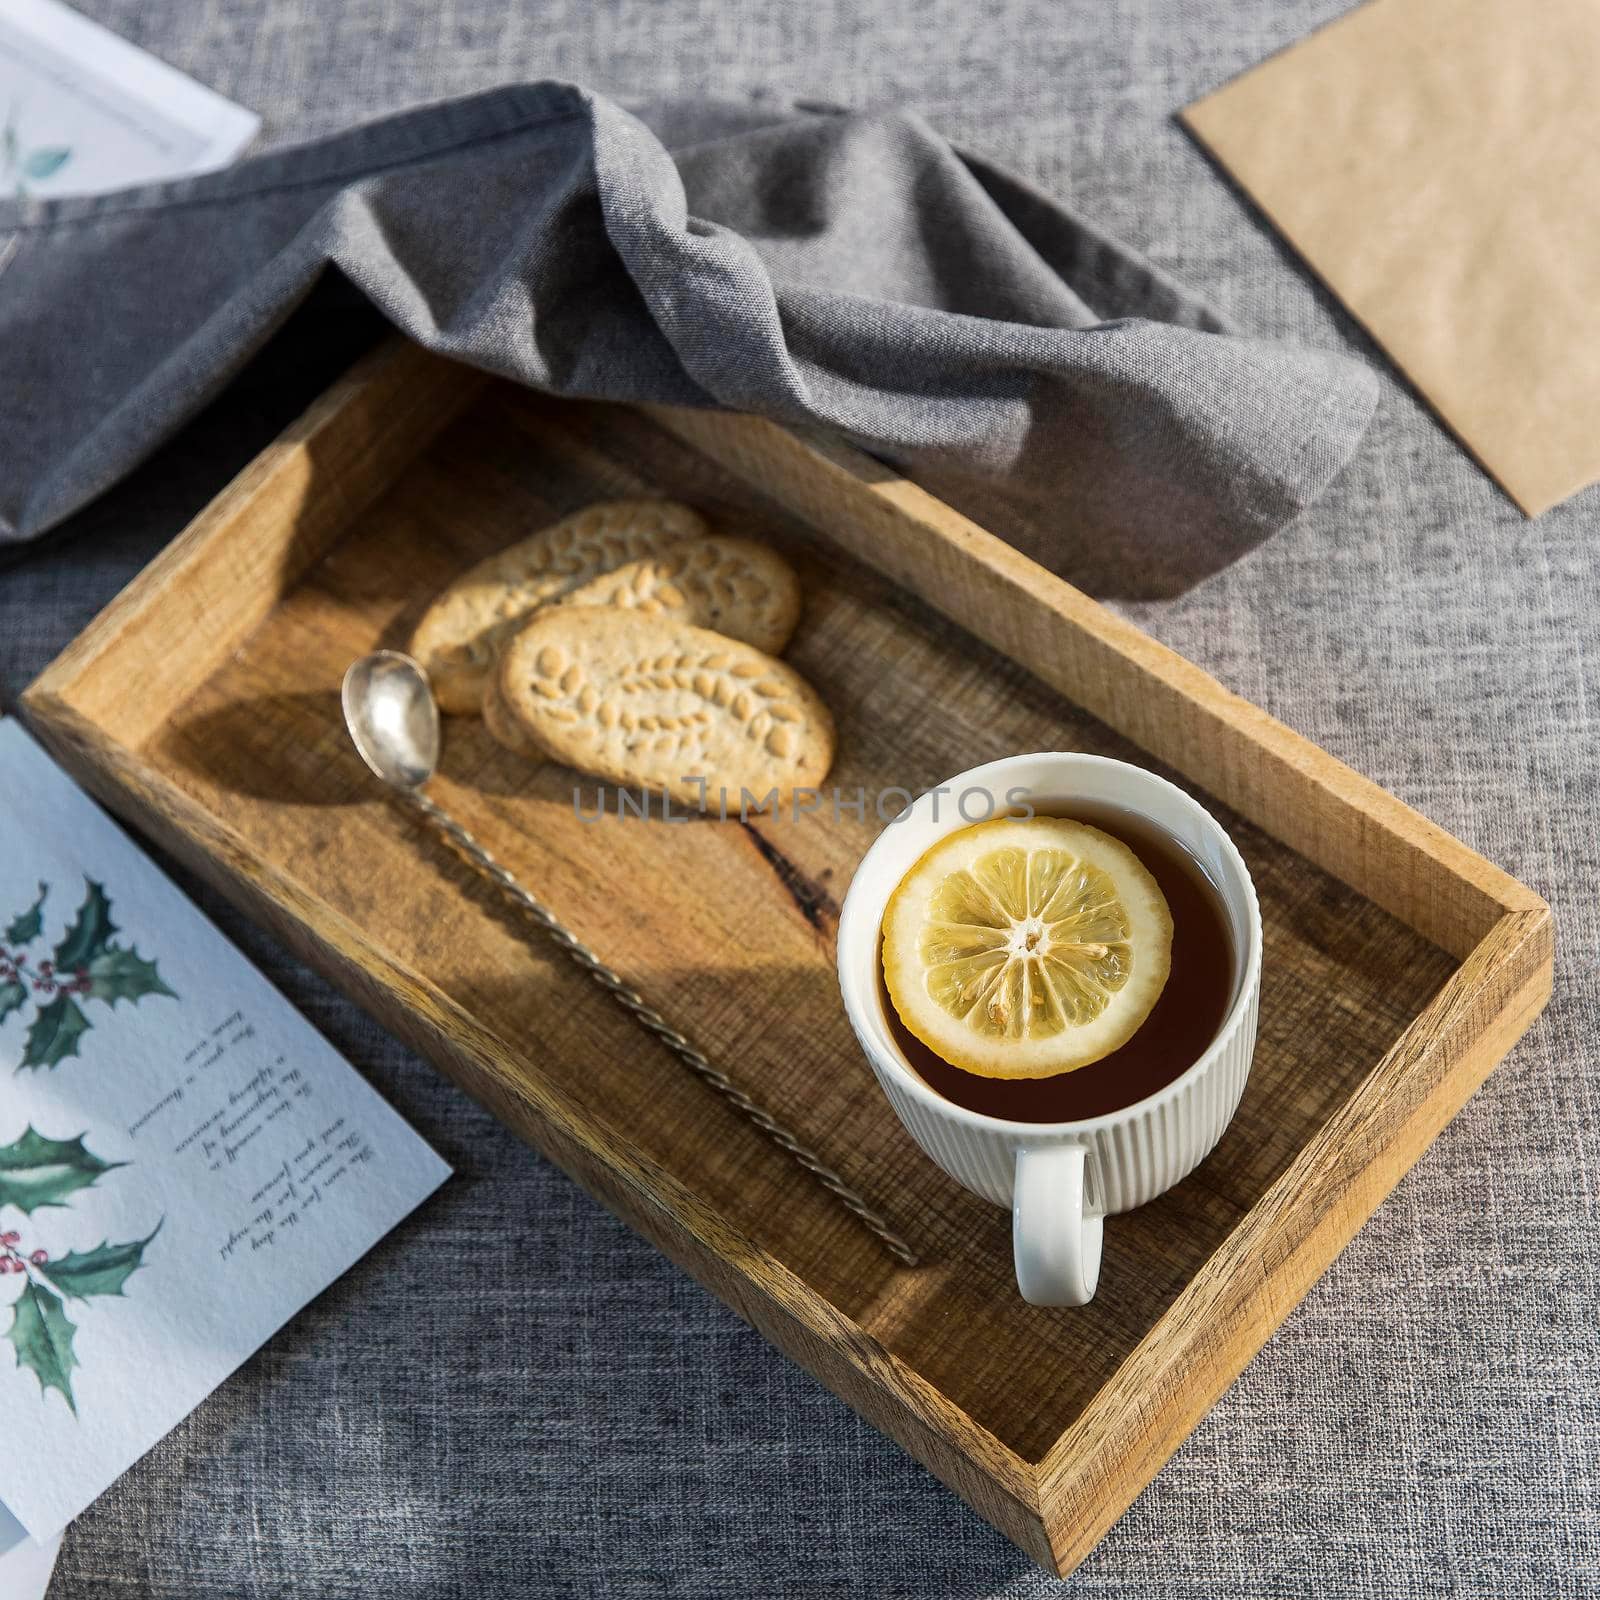 A white cup of tea with lemon, a long cupronickel spoon with a twisted handle and a saucer with three oatmeal cookies for breakfast on a wooden tray, a rag napkin on a gray sofa. by elenarostunova